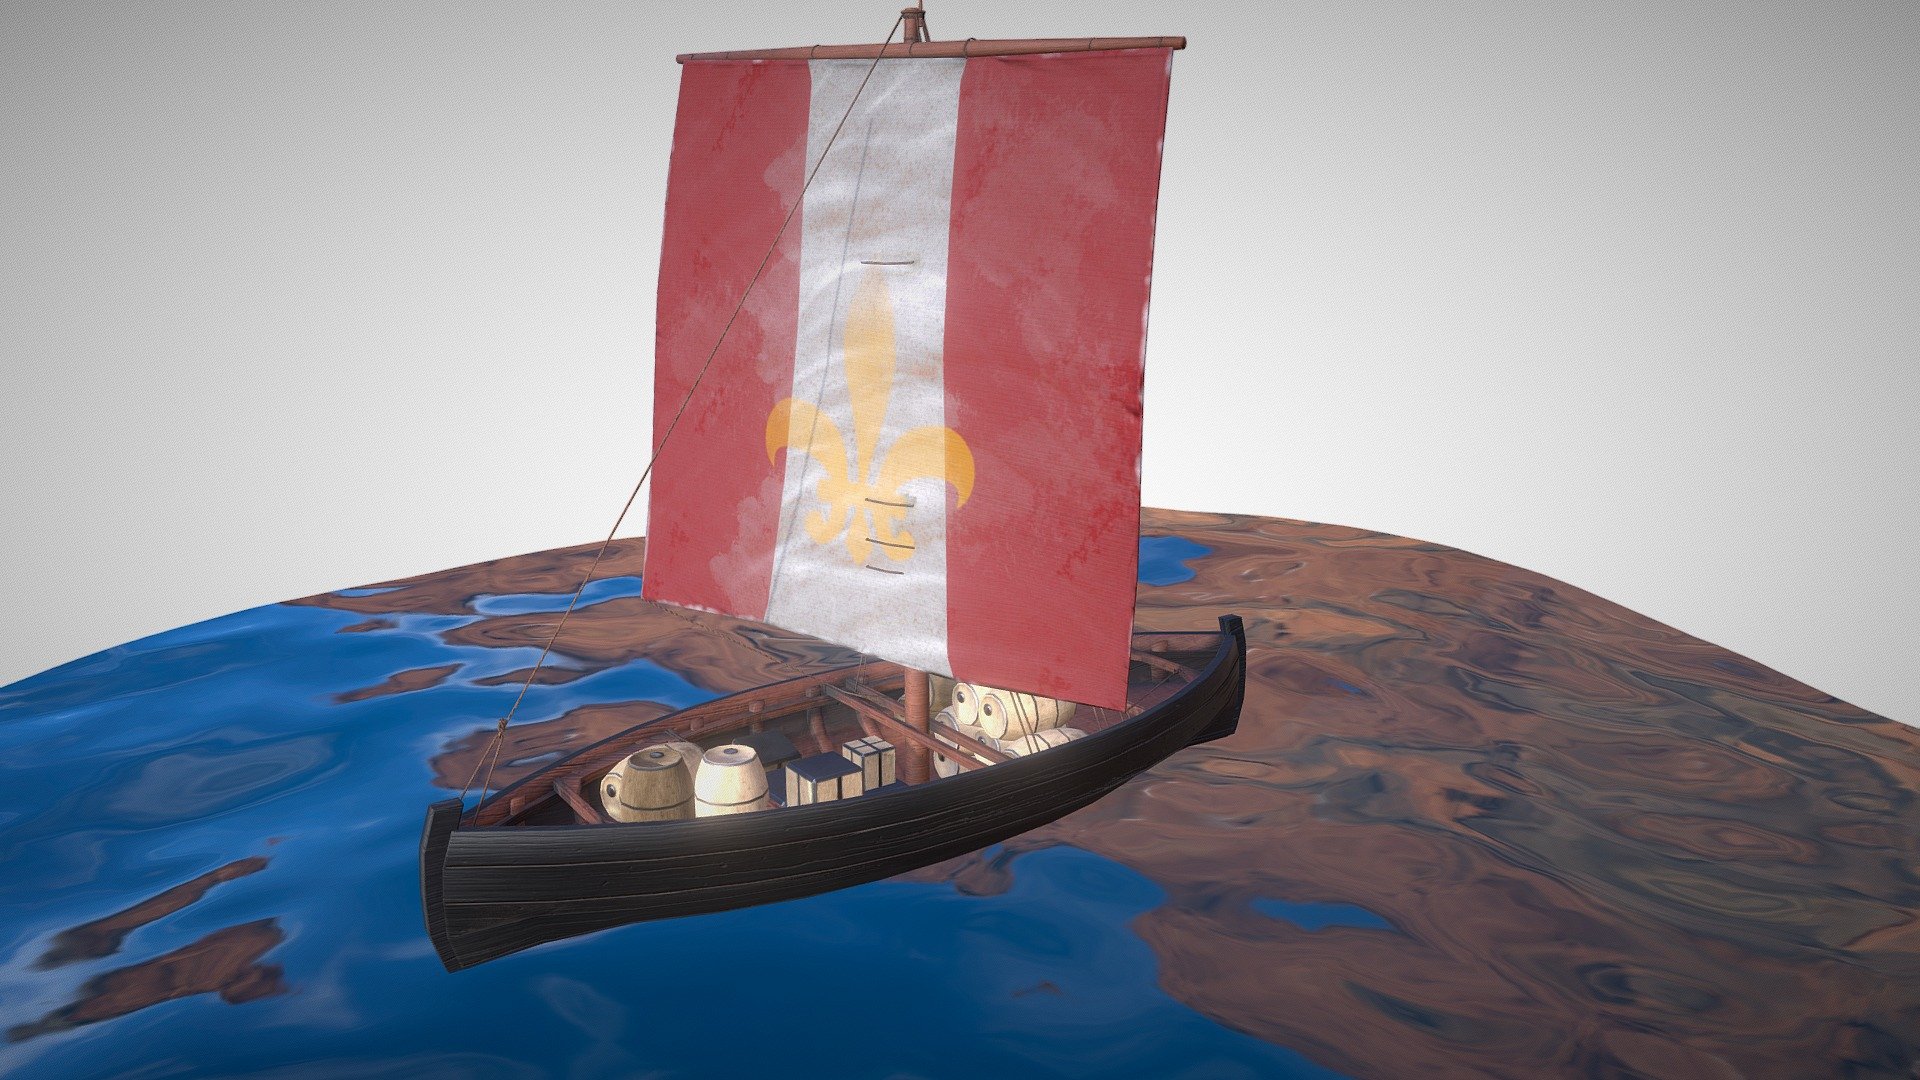 Download this Knarr Medieval Sailboat that is inspired from the design of the Viking era and was carefuly handcrafted at insya
This asset comes with 5 unique material textures for the body and for the sail of this boat, allowing you to create many unique combinations!
As a bonus we have also added a few props to fill up your scene. We have added barrels and trunks in this asset pack.
This asset is bundled with textures for: Blender, Unity3D, Unreal Engine 4, and any other 3D Modelling Software such as Autodesk 3DS Max or Maya.
Textures: 2K / PBR









 - Knarr - Medieval Sailboat - Buy Royalty Free 3D model by insya 3d model